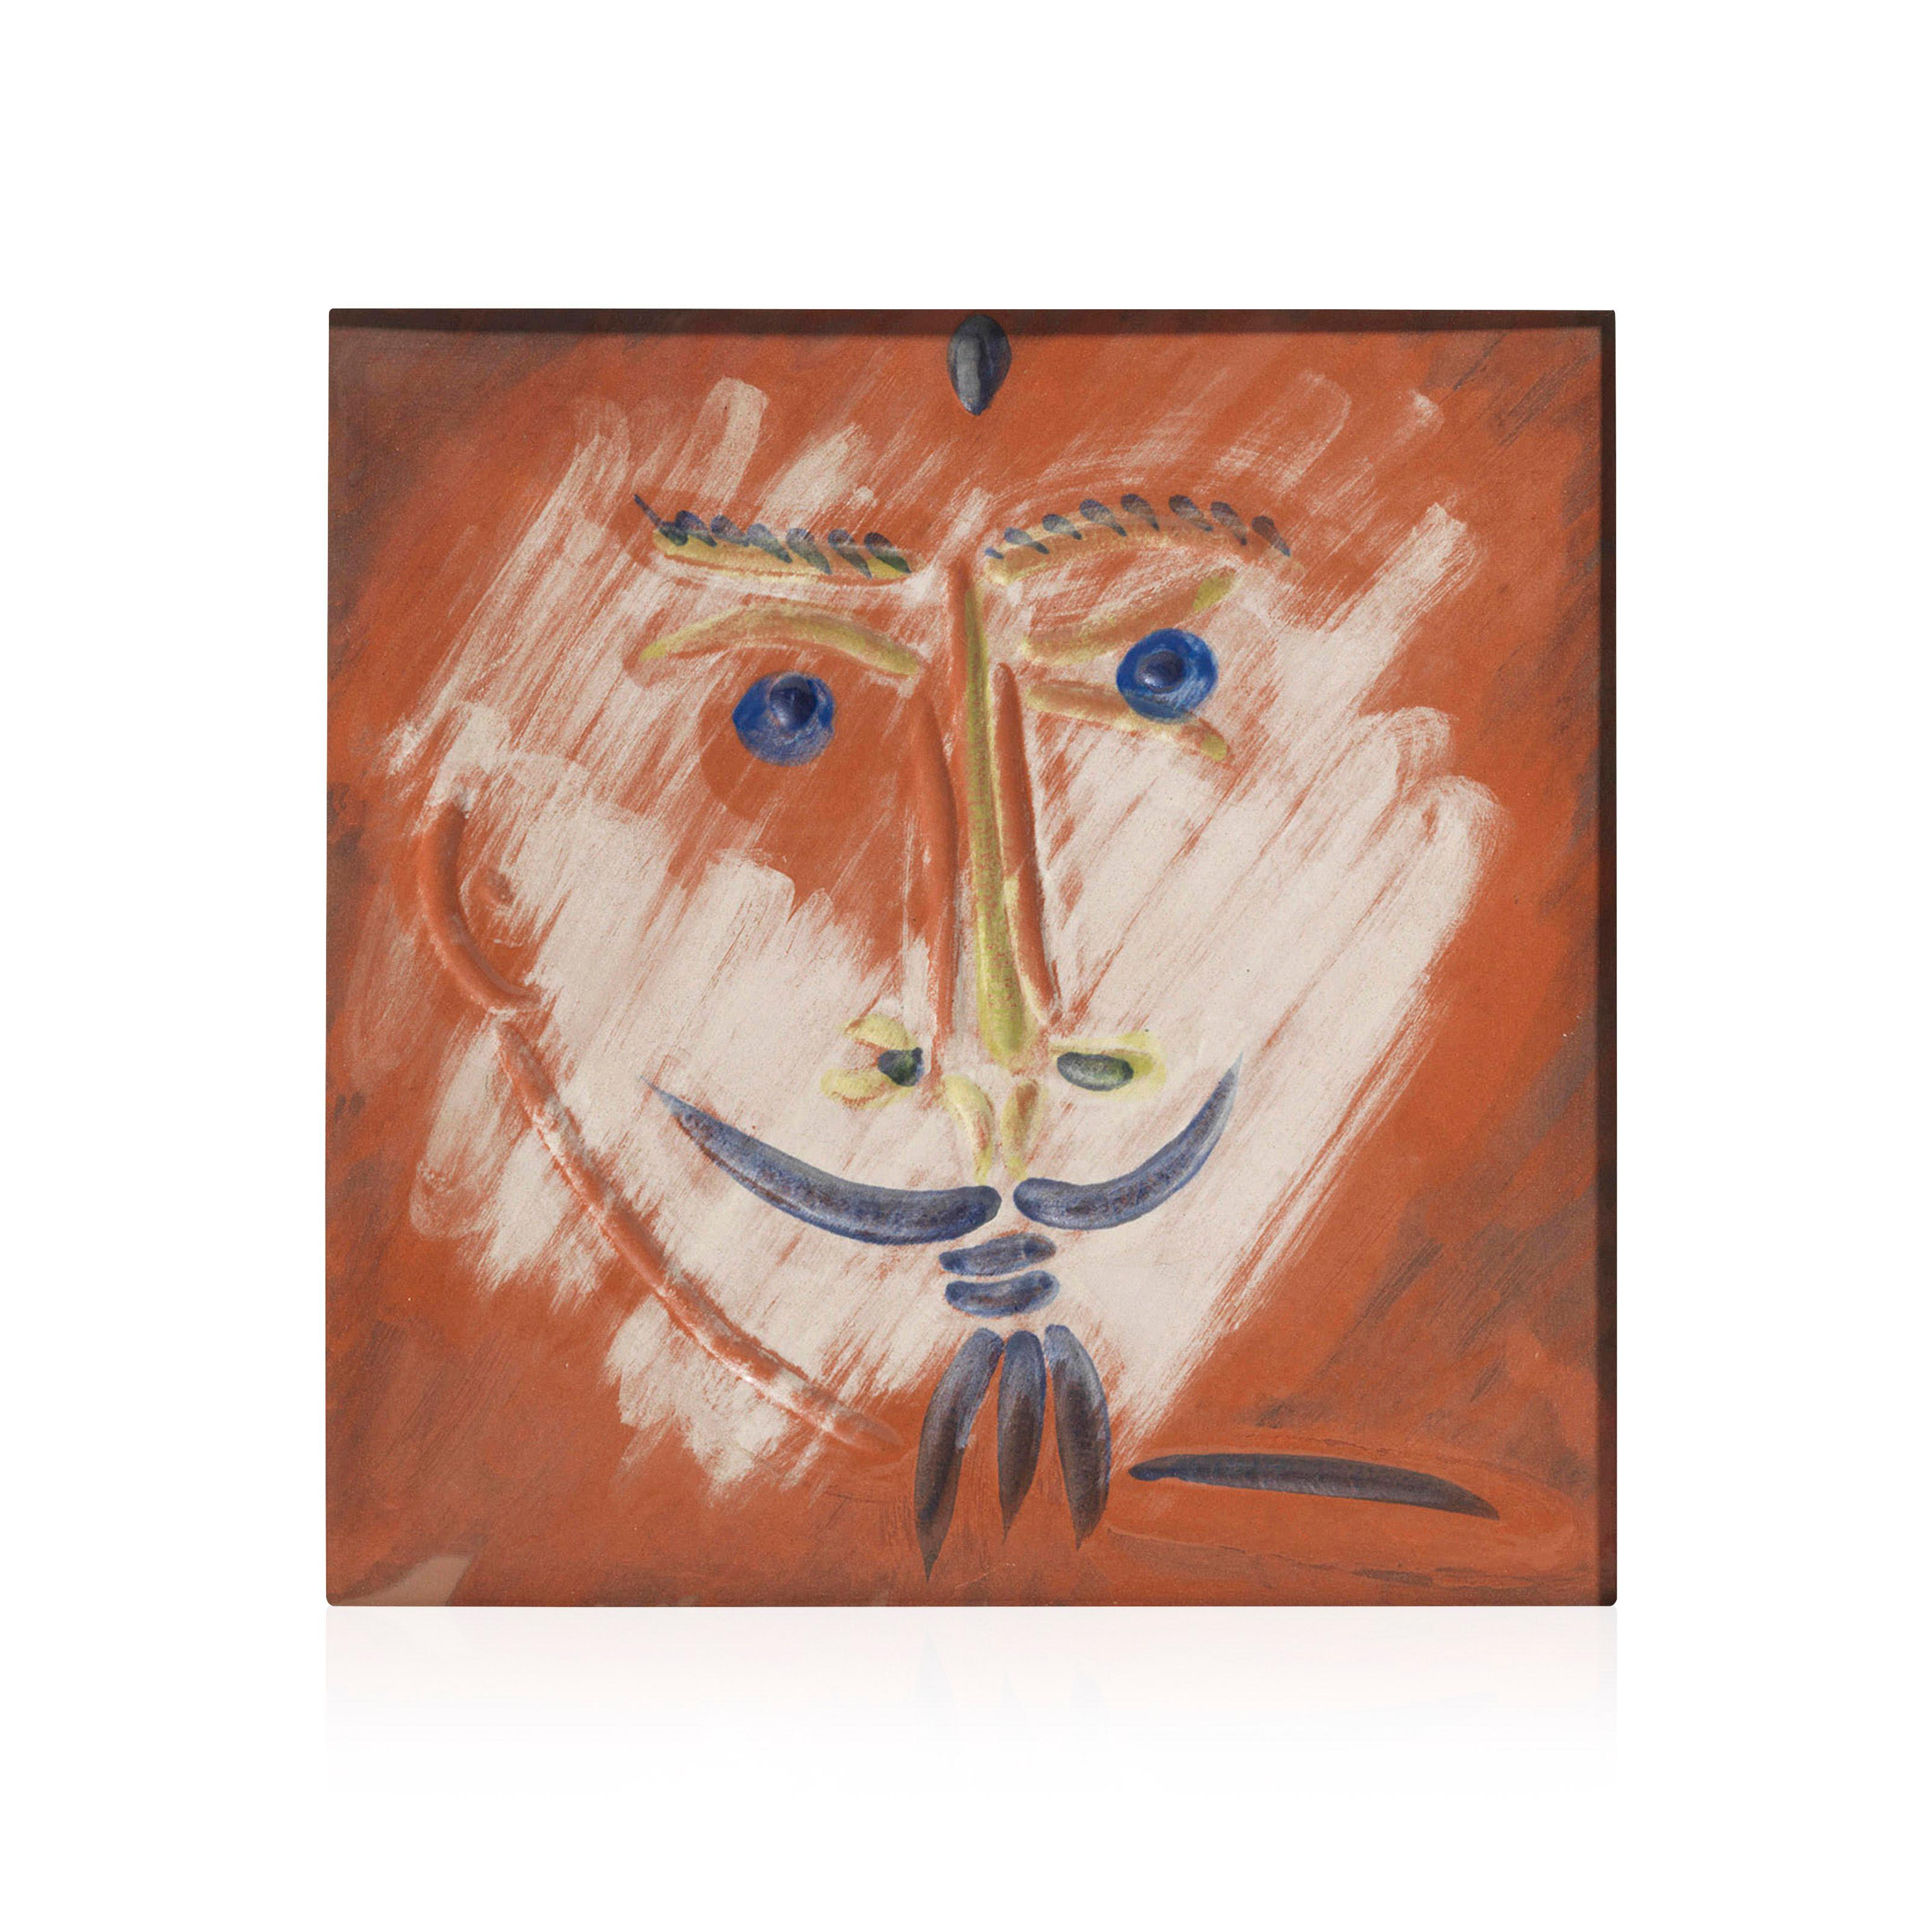 This Picasso ceramic tile "Visage à la Barbiche Ramié 601" is one in an edition of 100 and is made of white earthenware clay, and decorated with colored engobes and glaze. 

Please contact us with any questions.